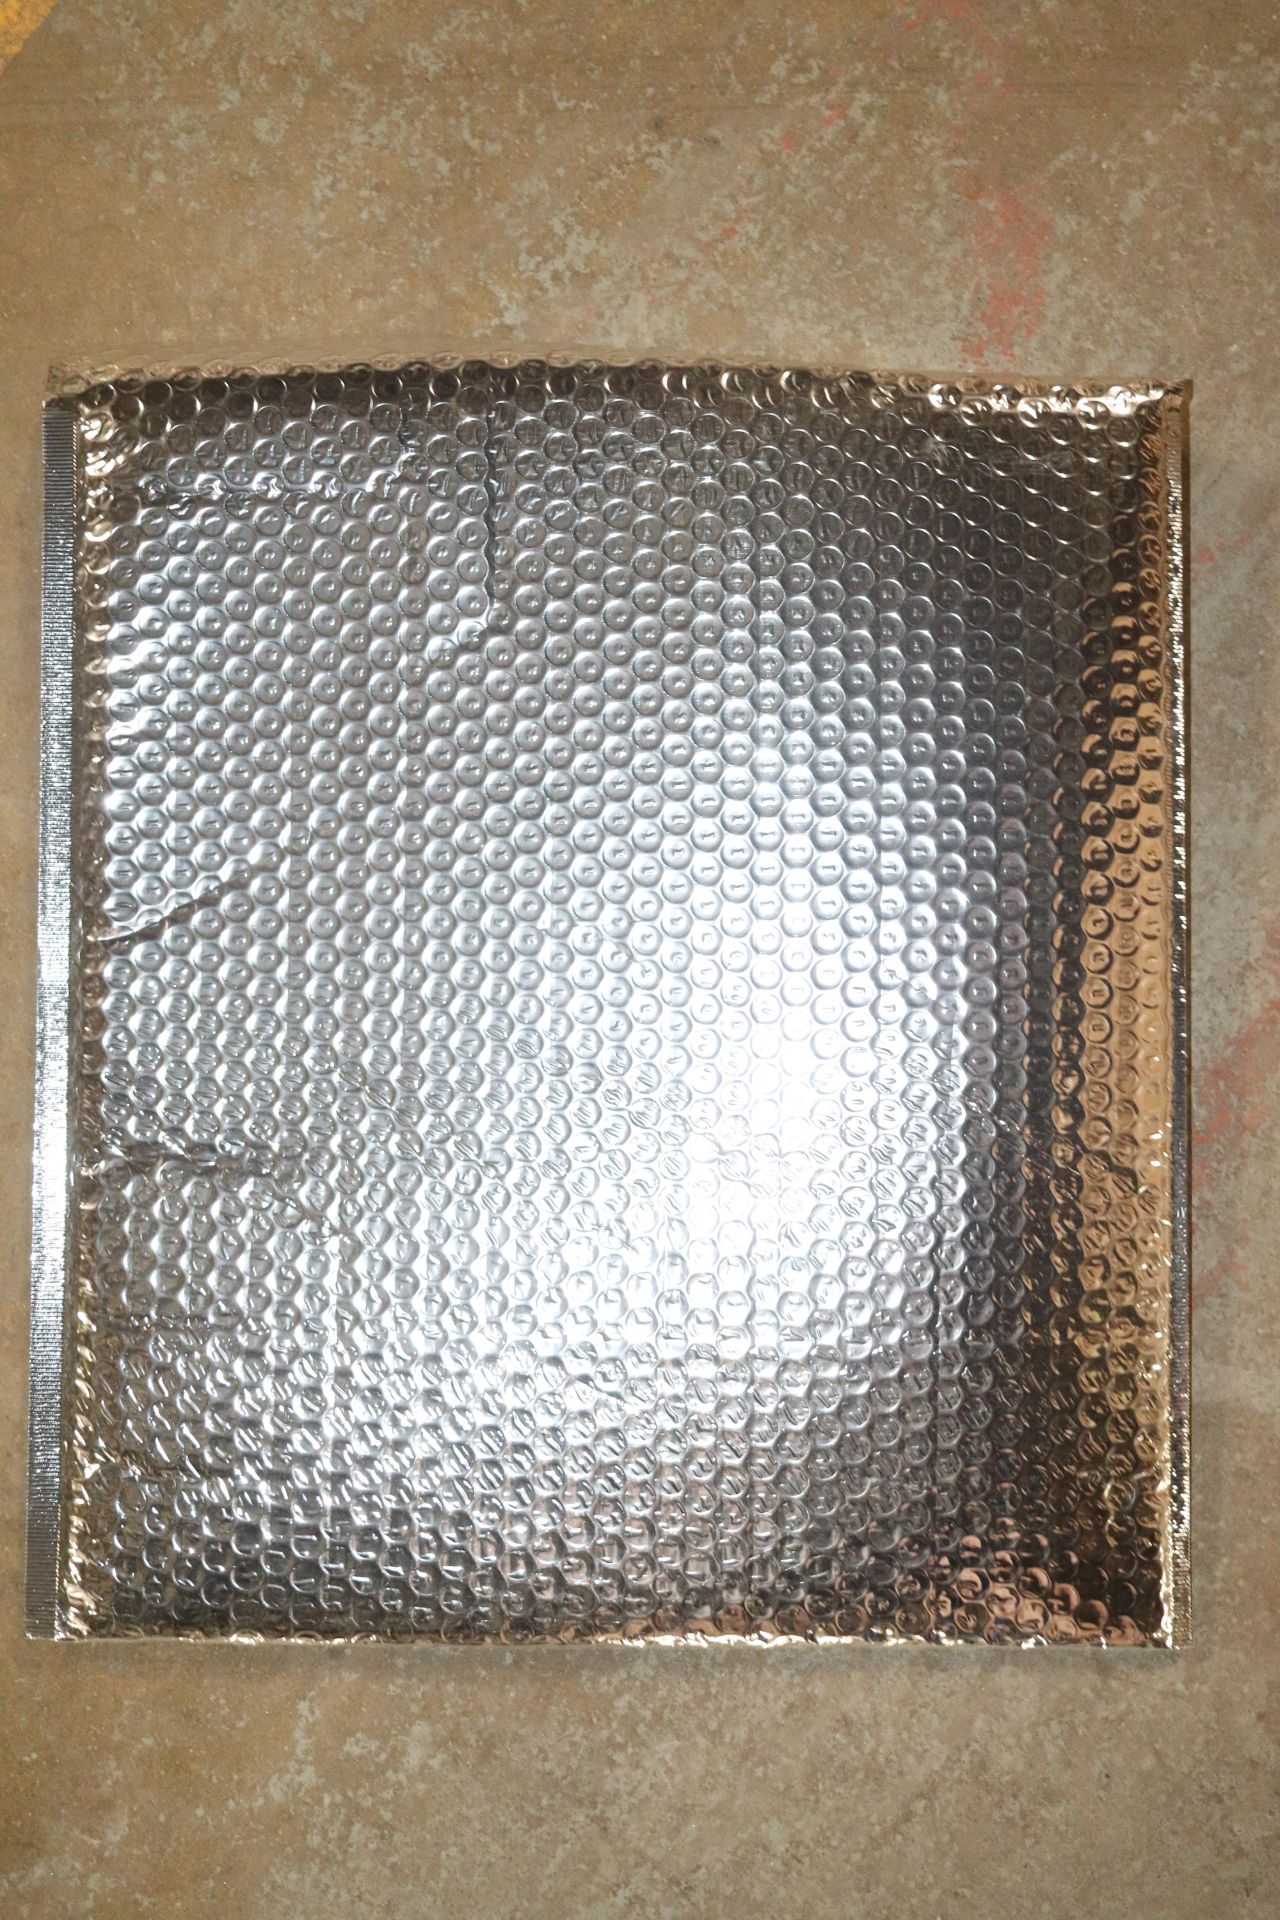 Three cases of metallic bubble mailers, 11" x 15", 50 per case - Image 2 of 2